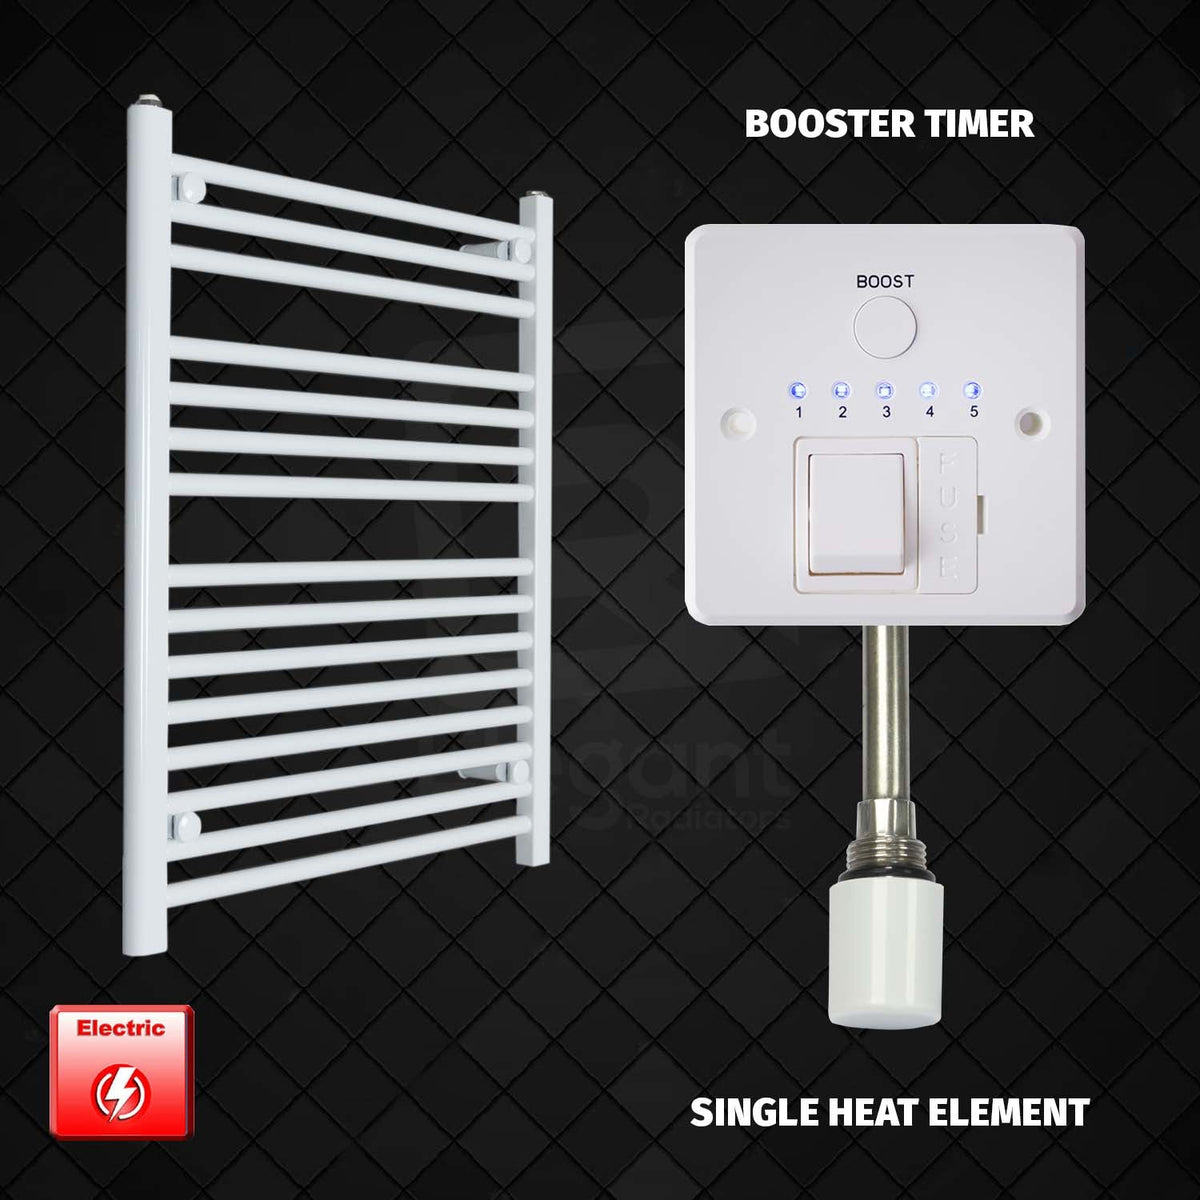 800 mm High 700 mm Wide Pre-Filled Electric Heated Towel Radiator White HTR Booster Timer Single Heat Element